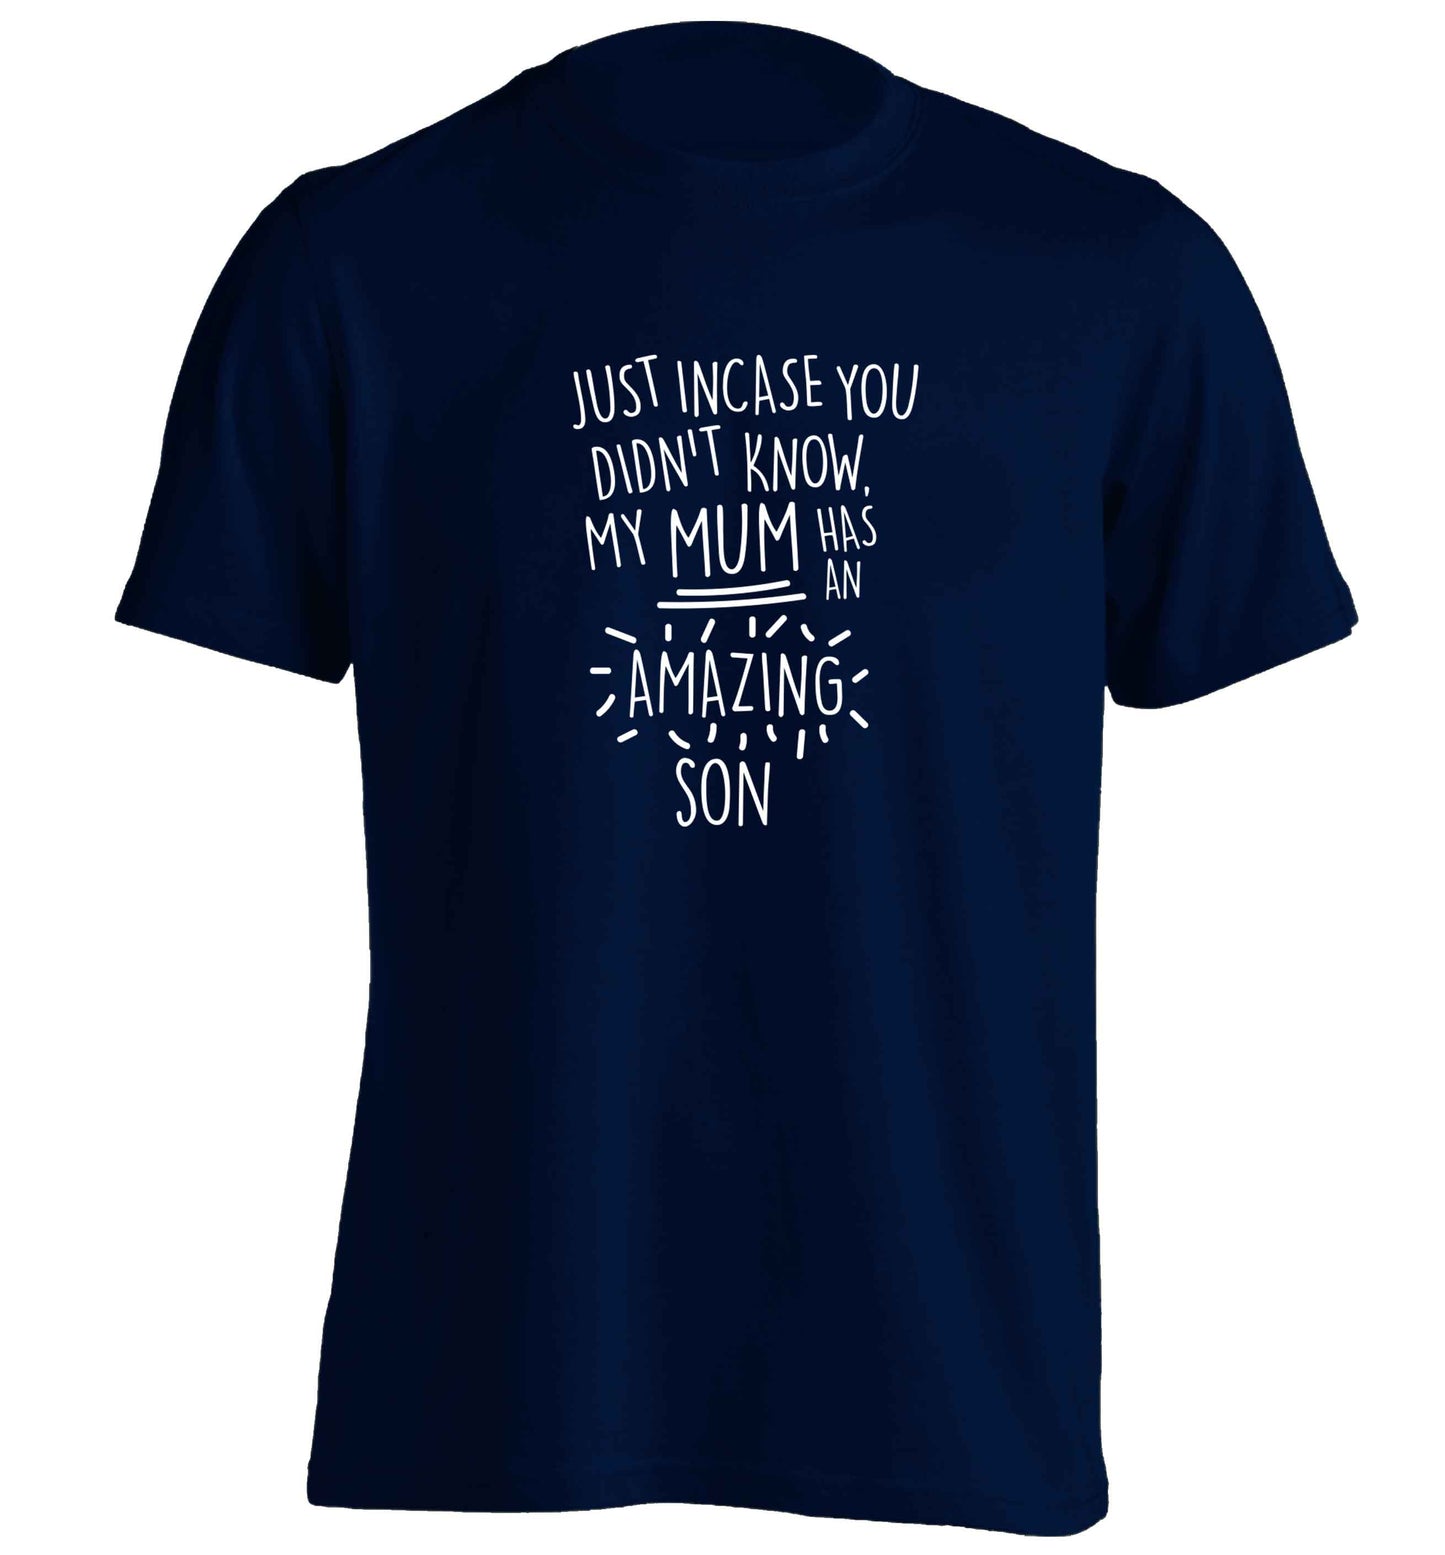 Just incase you didn't know my mum has an amazing son adults unisex navy Tshirt 2XL